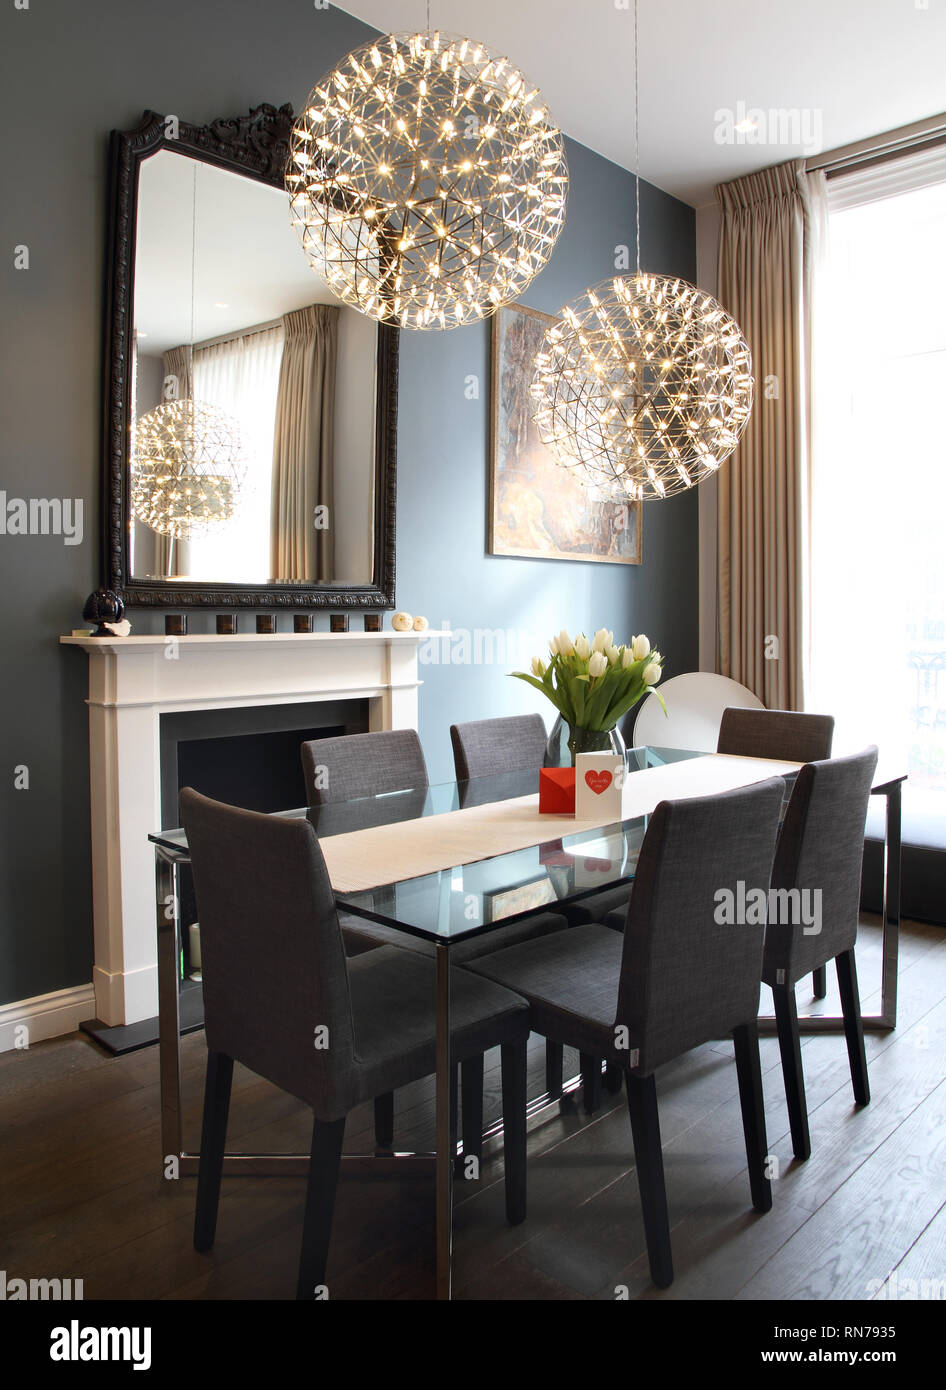 Kitchen diner in London Apartment Stock Photo